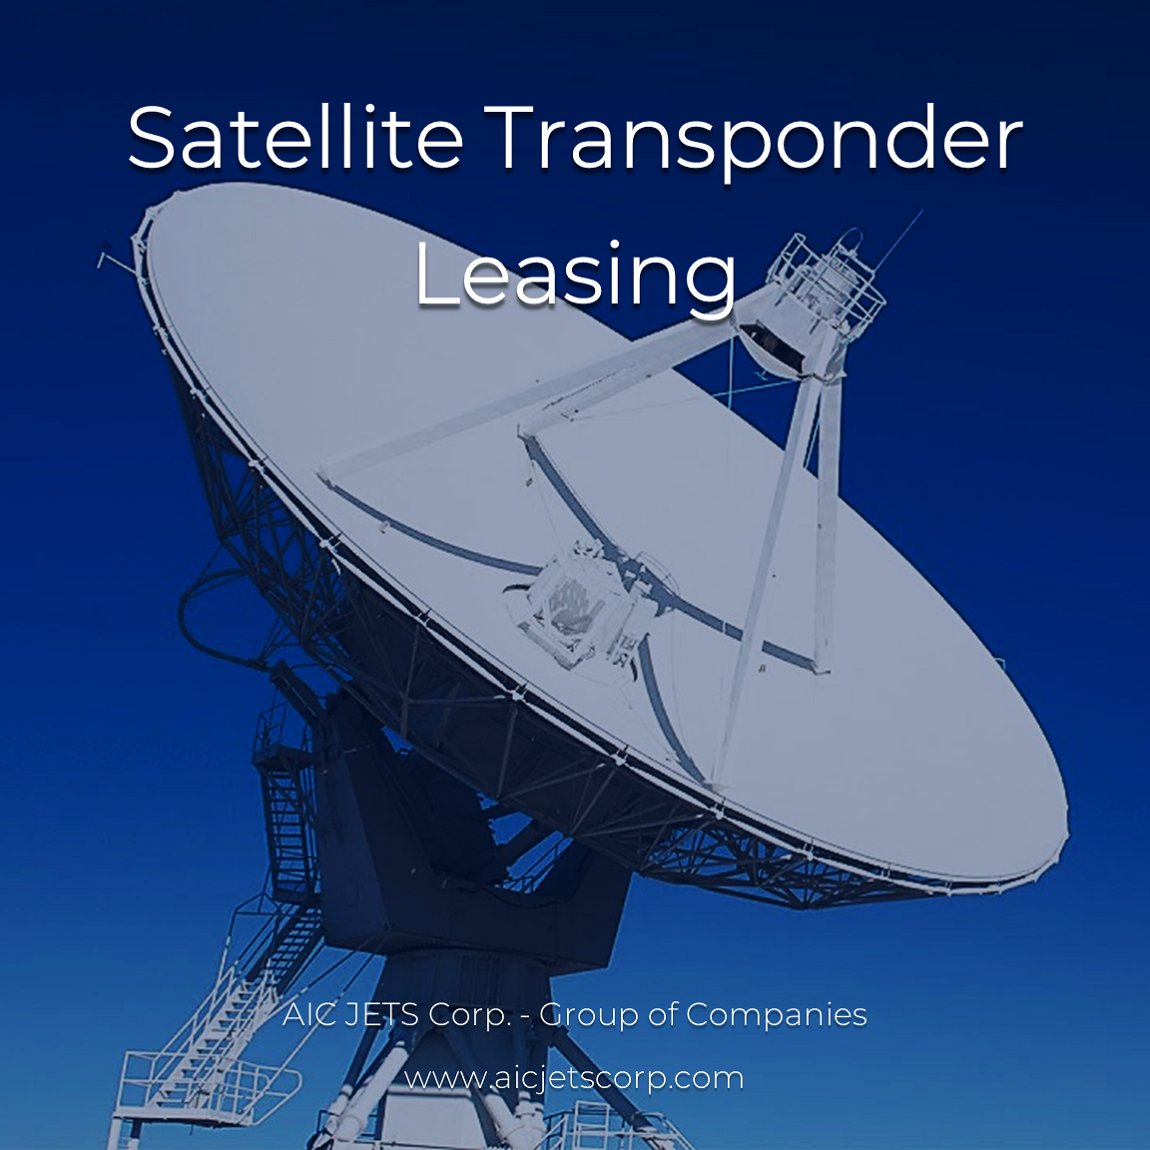 Join the list of our clients we support with lease of satellite transponder:

instagram.com/p/CsUQhBCJs-L/

AIC JETS Corp.

#AICJETSCorp #telecommunications #Iridium9575
#月 #太陽 #satellite #iss #aerospace #flywithus #launch #spacecommunication #satellitecommunications
#spaceindustry